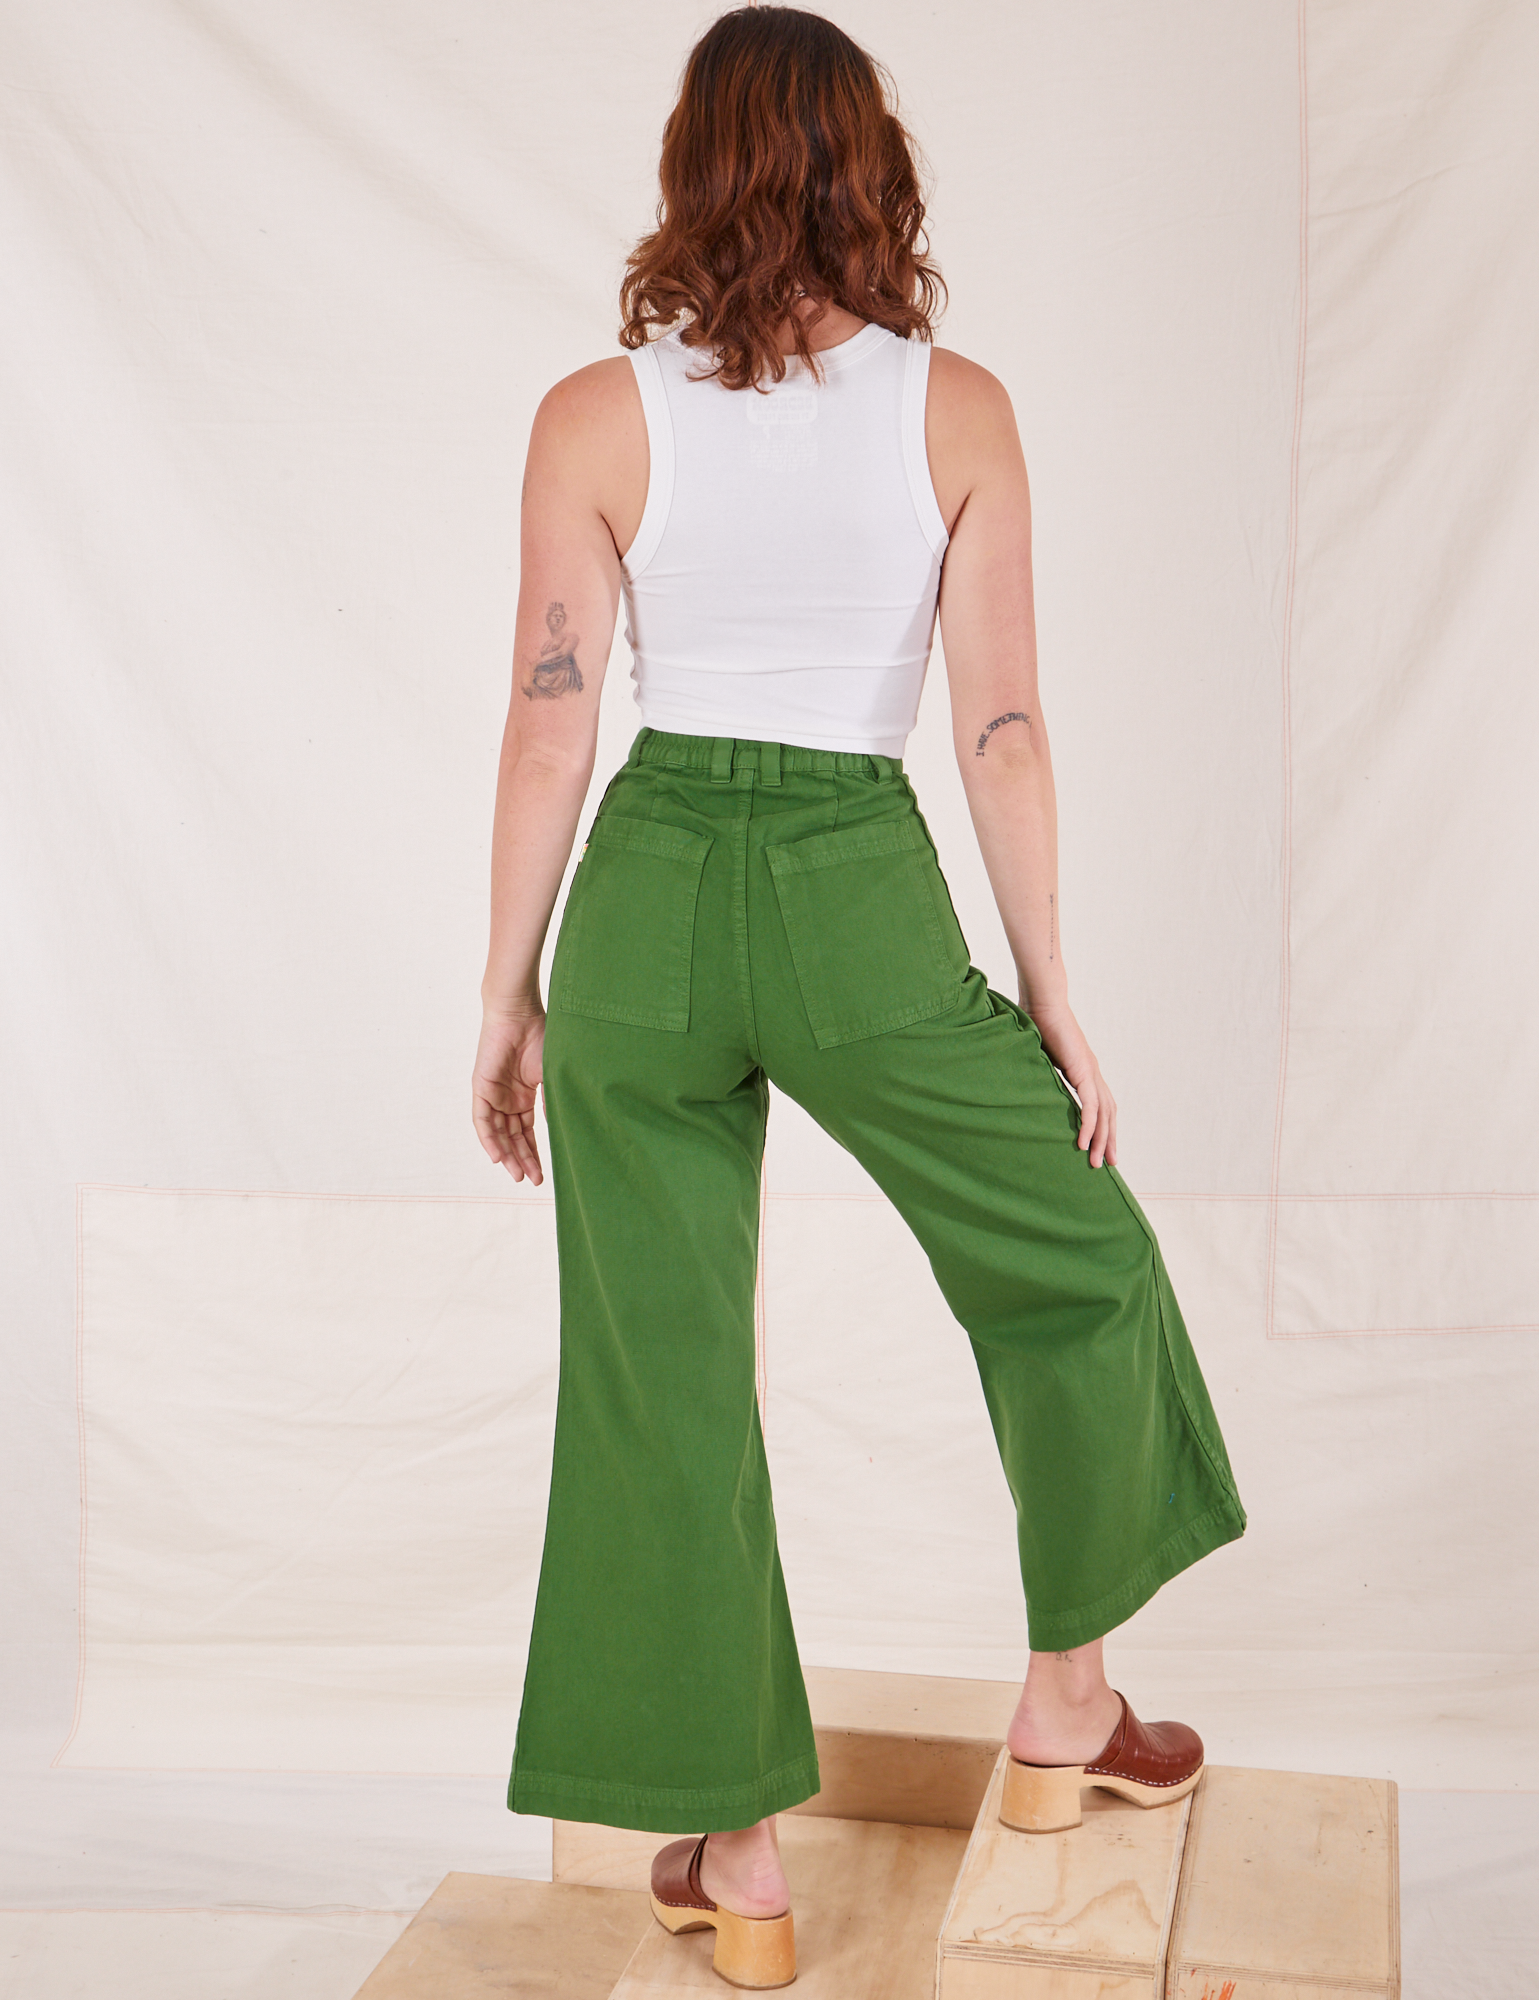 Back view of Bell Bottoms in Lawn Green and vintage off-white Cropped Tank Top on Alex